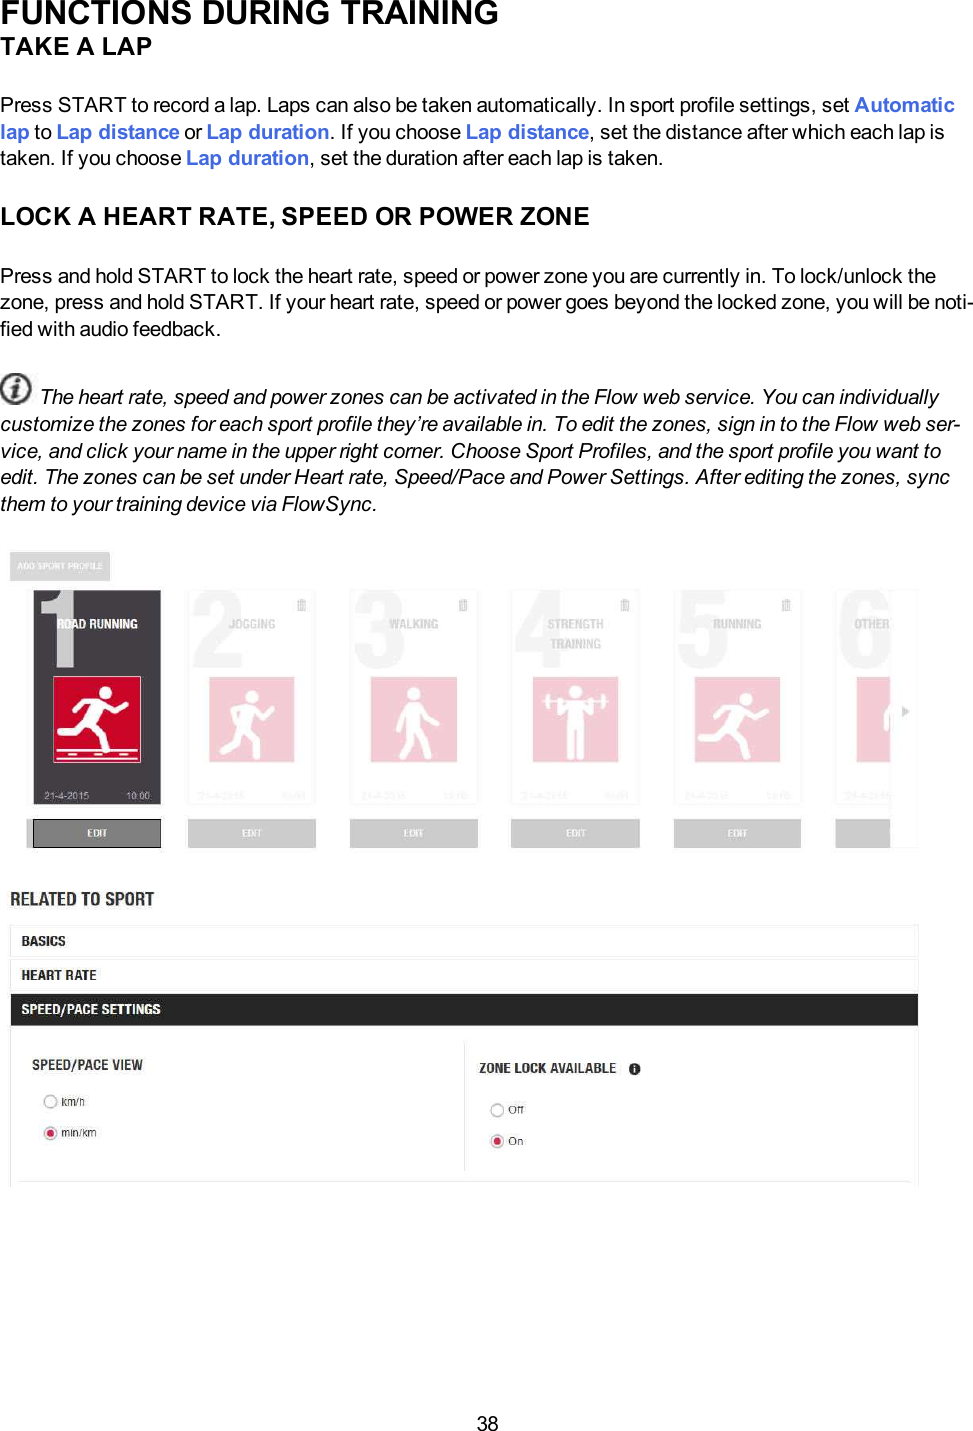 38FUNCTIONS DURING TRAININGTAKE A LAPPress START to record a lap. Laps can also be taken automatically. In sport profile settings, set Automaticlap to Lap distance or Lap duration. If you choose Lap distance, set the distance after which each lap istaken. If you choose Lap duration, set the duration after each lap is taken.LOCK A HEART RATE, SPEED OR POWER ZONEPress and hold START to lock the heart rate, speed or power zone you are currently in. To lock/unlock thezone, press and hold START. If your heart rate, speed or power goes beyond the locked zone, you will be noti-fied with audio feedback.The heart rate, speed and power zones can be activated in the Flow web service. You can individuallycustomize the zones for each sport profile they’re available in. To edit the zones, sign in to the Flow web ser-vice, and click your name in the upper right corner. Choose Sport Profiles, and the sport profile you want toedit. The zones can be set under Heart rate, Speed/Pace and Power Settings. After editing the zones, syncthem to your training device via FlowSync.